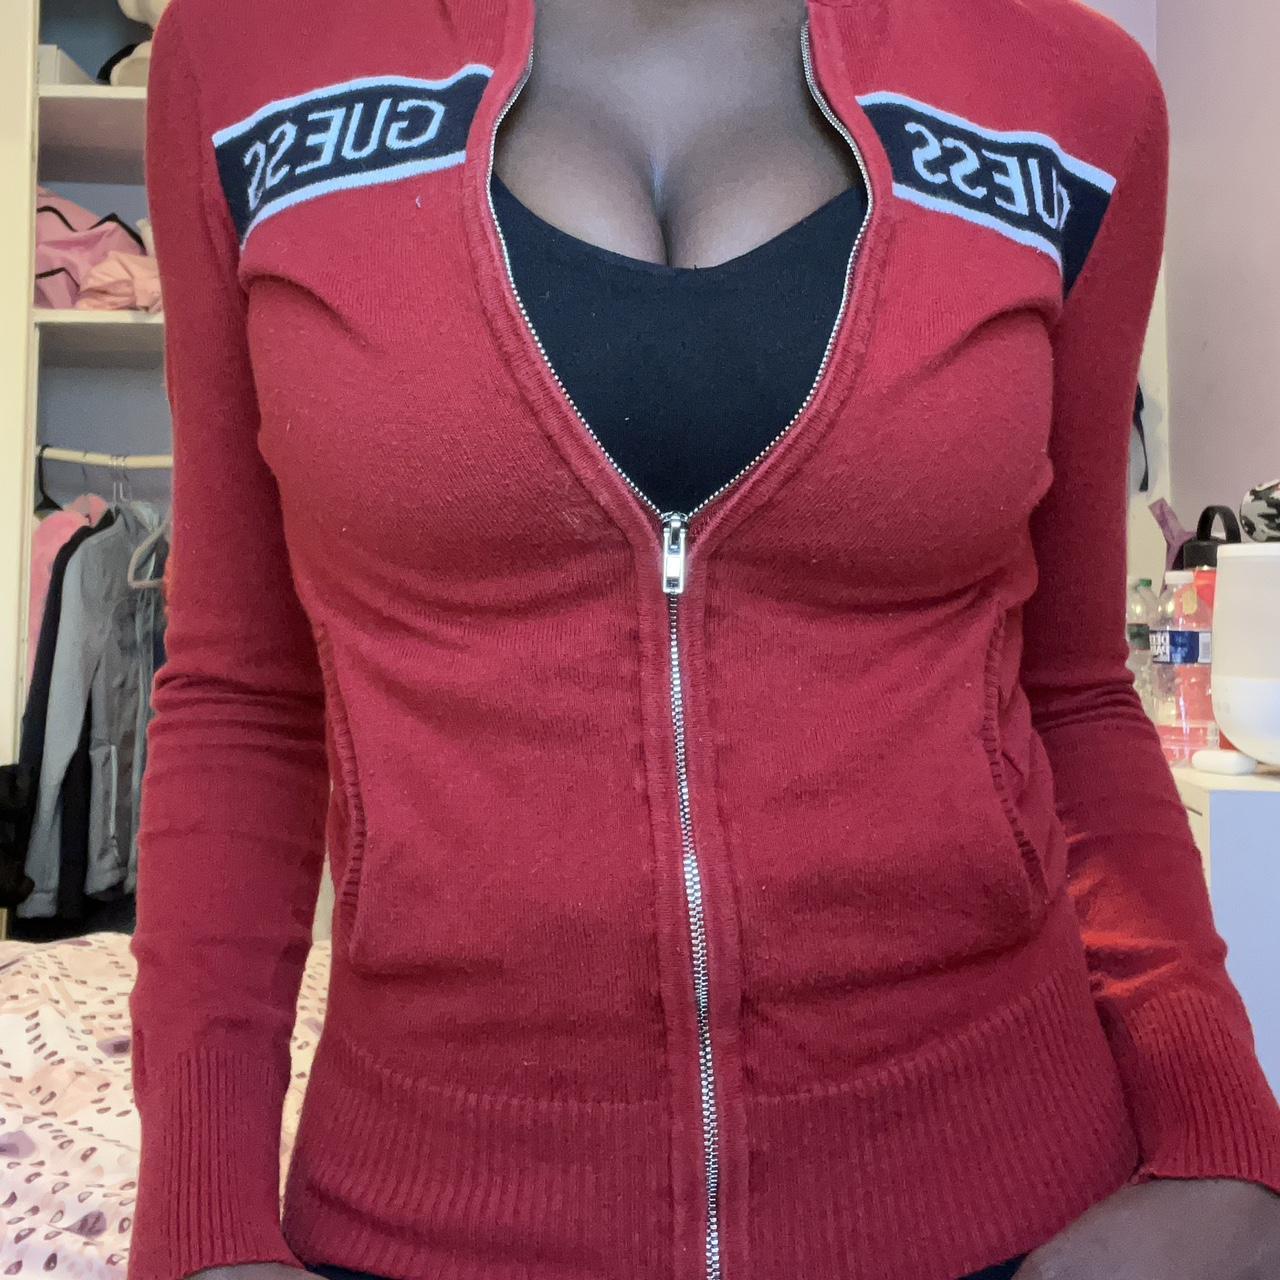 Guess Women's Red and Black Hoodie